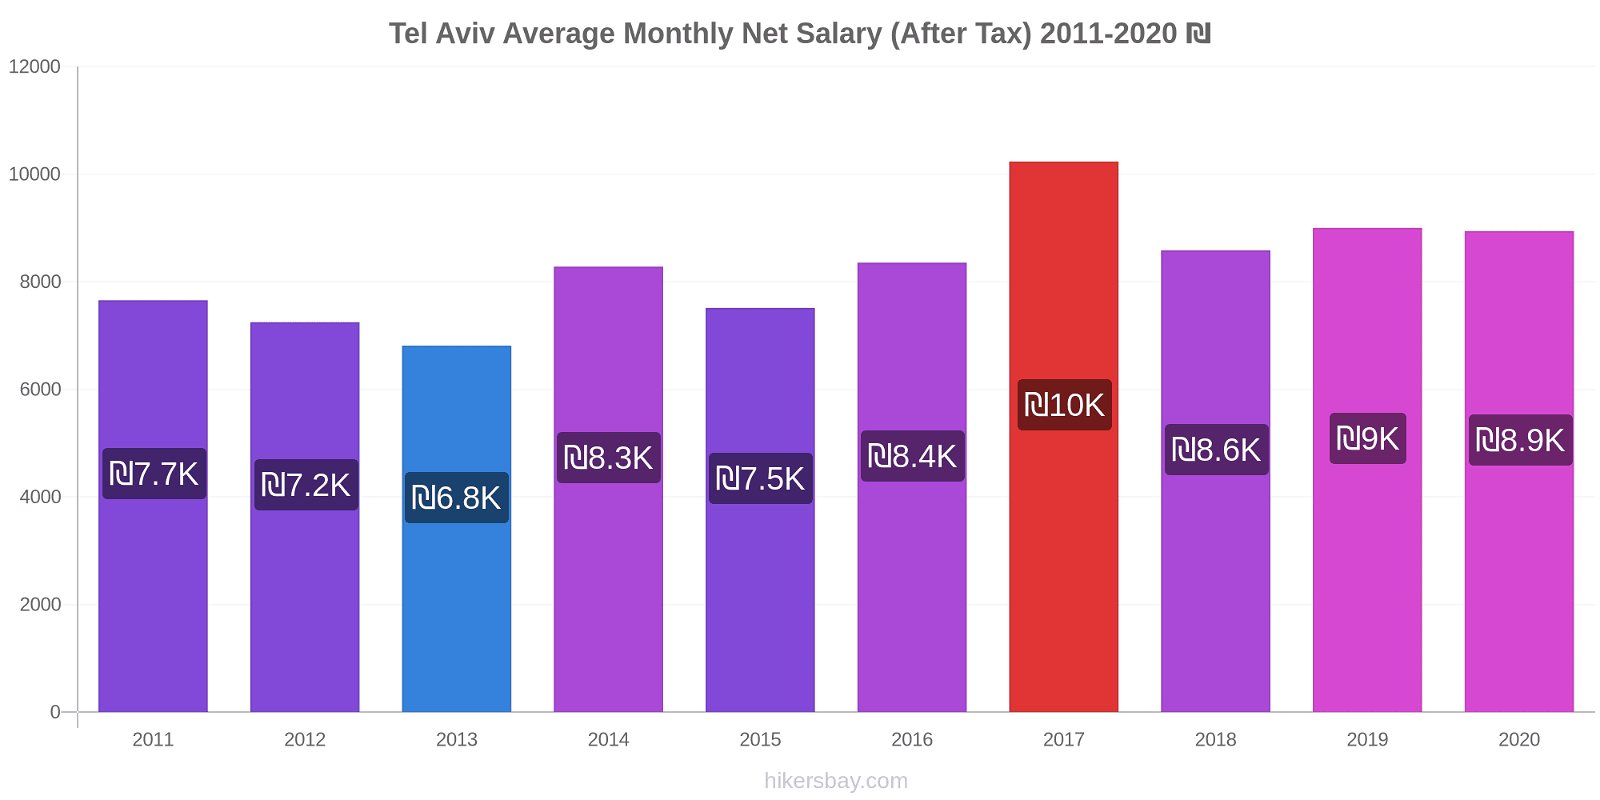 Tel Aviv price changes Average Monthly Net Salary (After Tax) hikersbay.com